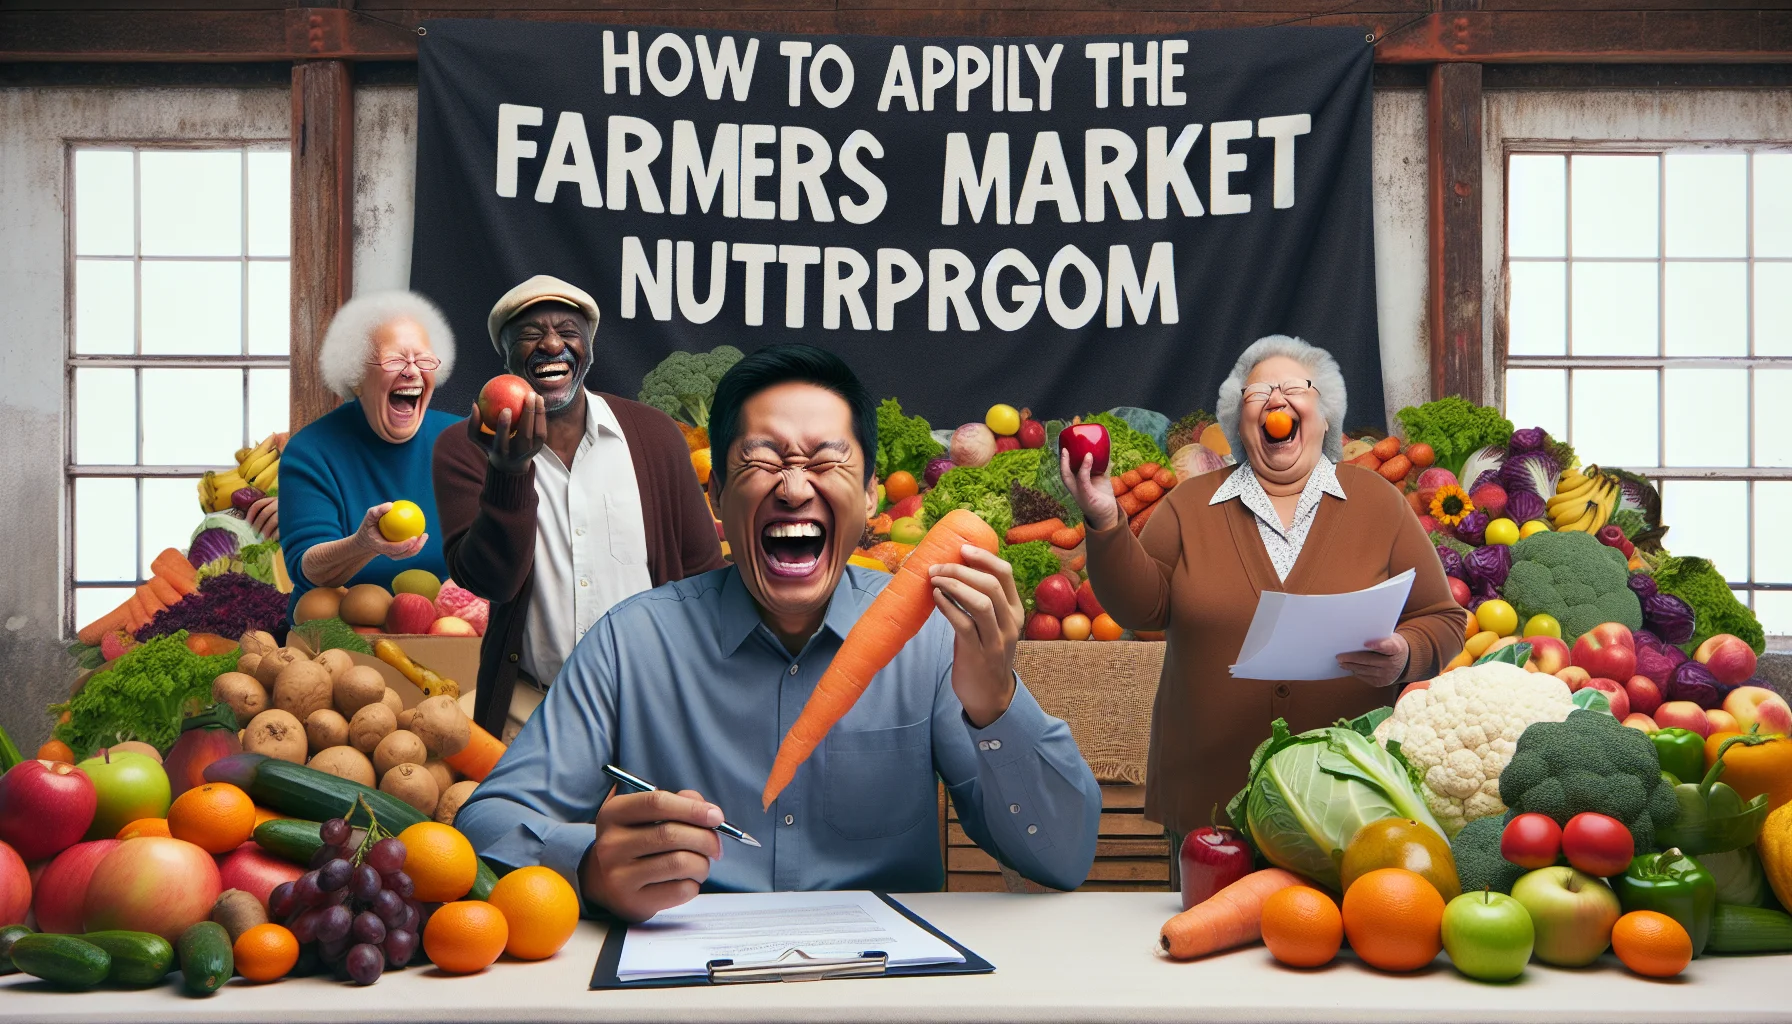 Create a humorous, realistic image that illustrates how to apply for the Senior Farmers Market Nutrition Program. Picture an elderly South Asian man laughing heartily while filling out application forms surrounded by a mountain of colorful fruits and vegetables. Beside him, an elderly Black woman is humorously trying to balance a giant carrot on her nose, while an elderly Caucasian man makes an amusing attempt to juggle apples and oranges. Emphasize the diversity of healthy foods available, including vibrant fruits, leafy greens, and fresh vegetables, while highlighting the joyful, funny atmosphere.